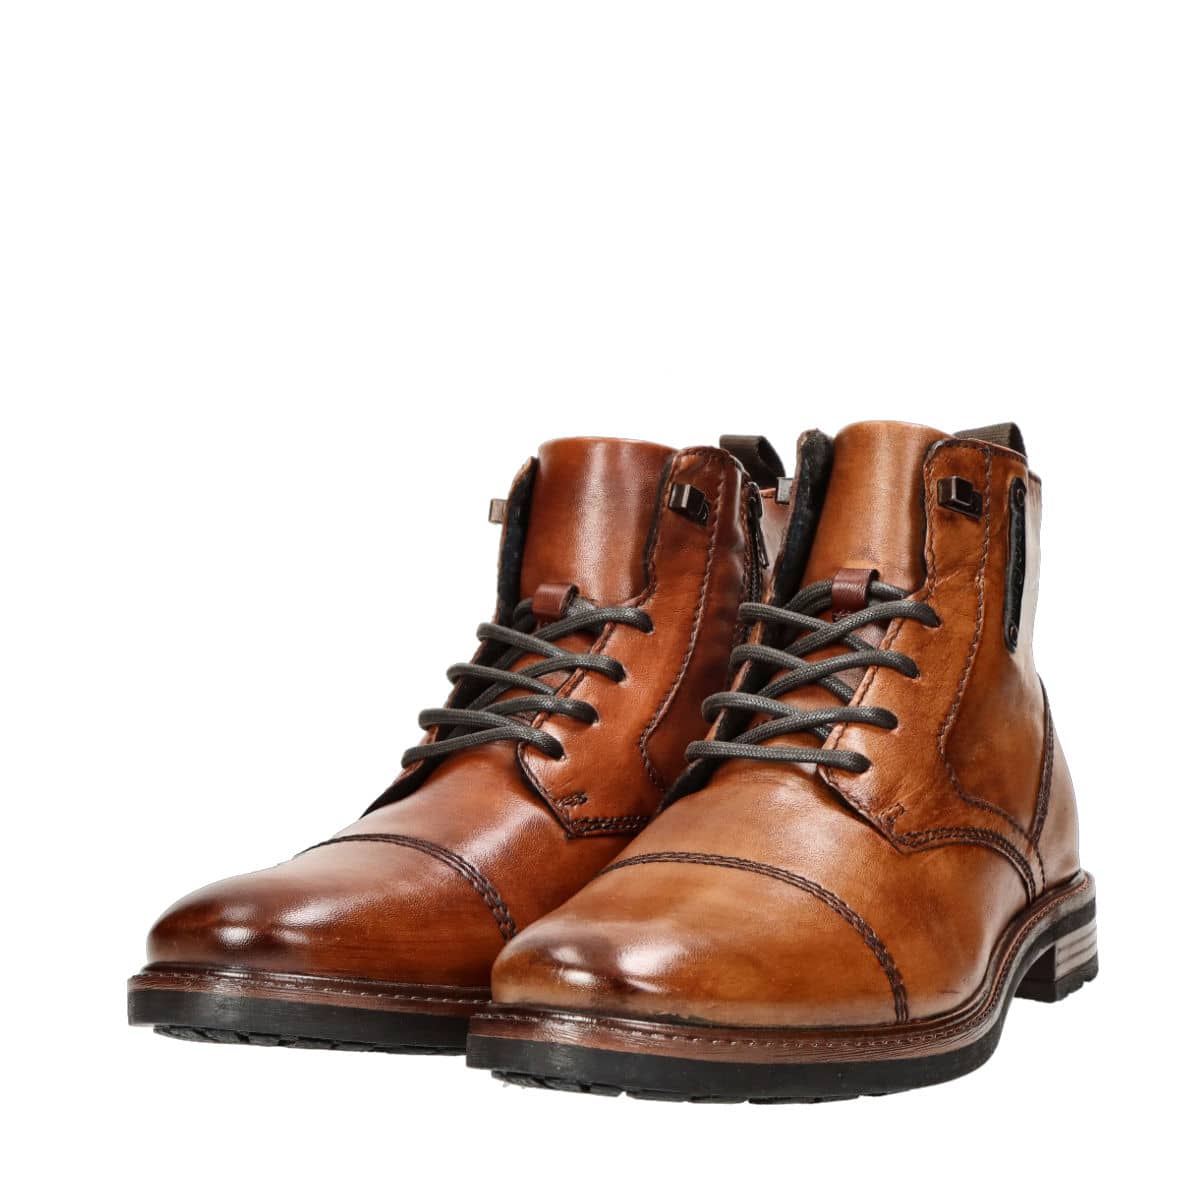 drie Helemaal droog Magnetisch Bugatti men's leather ankle boots with zipper - cognac brown | Robel.shoes